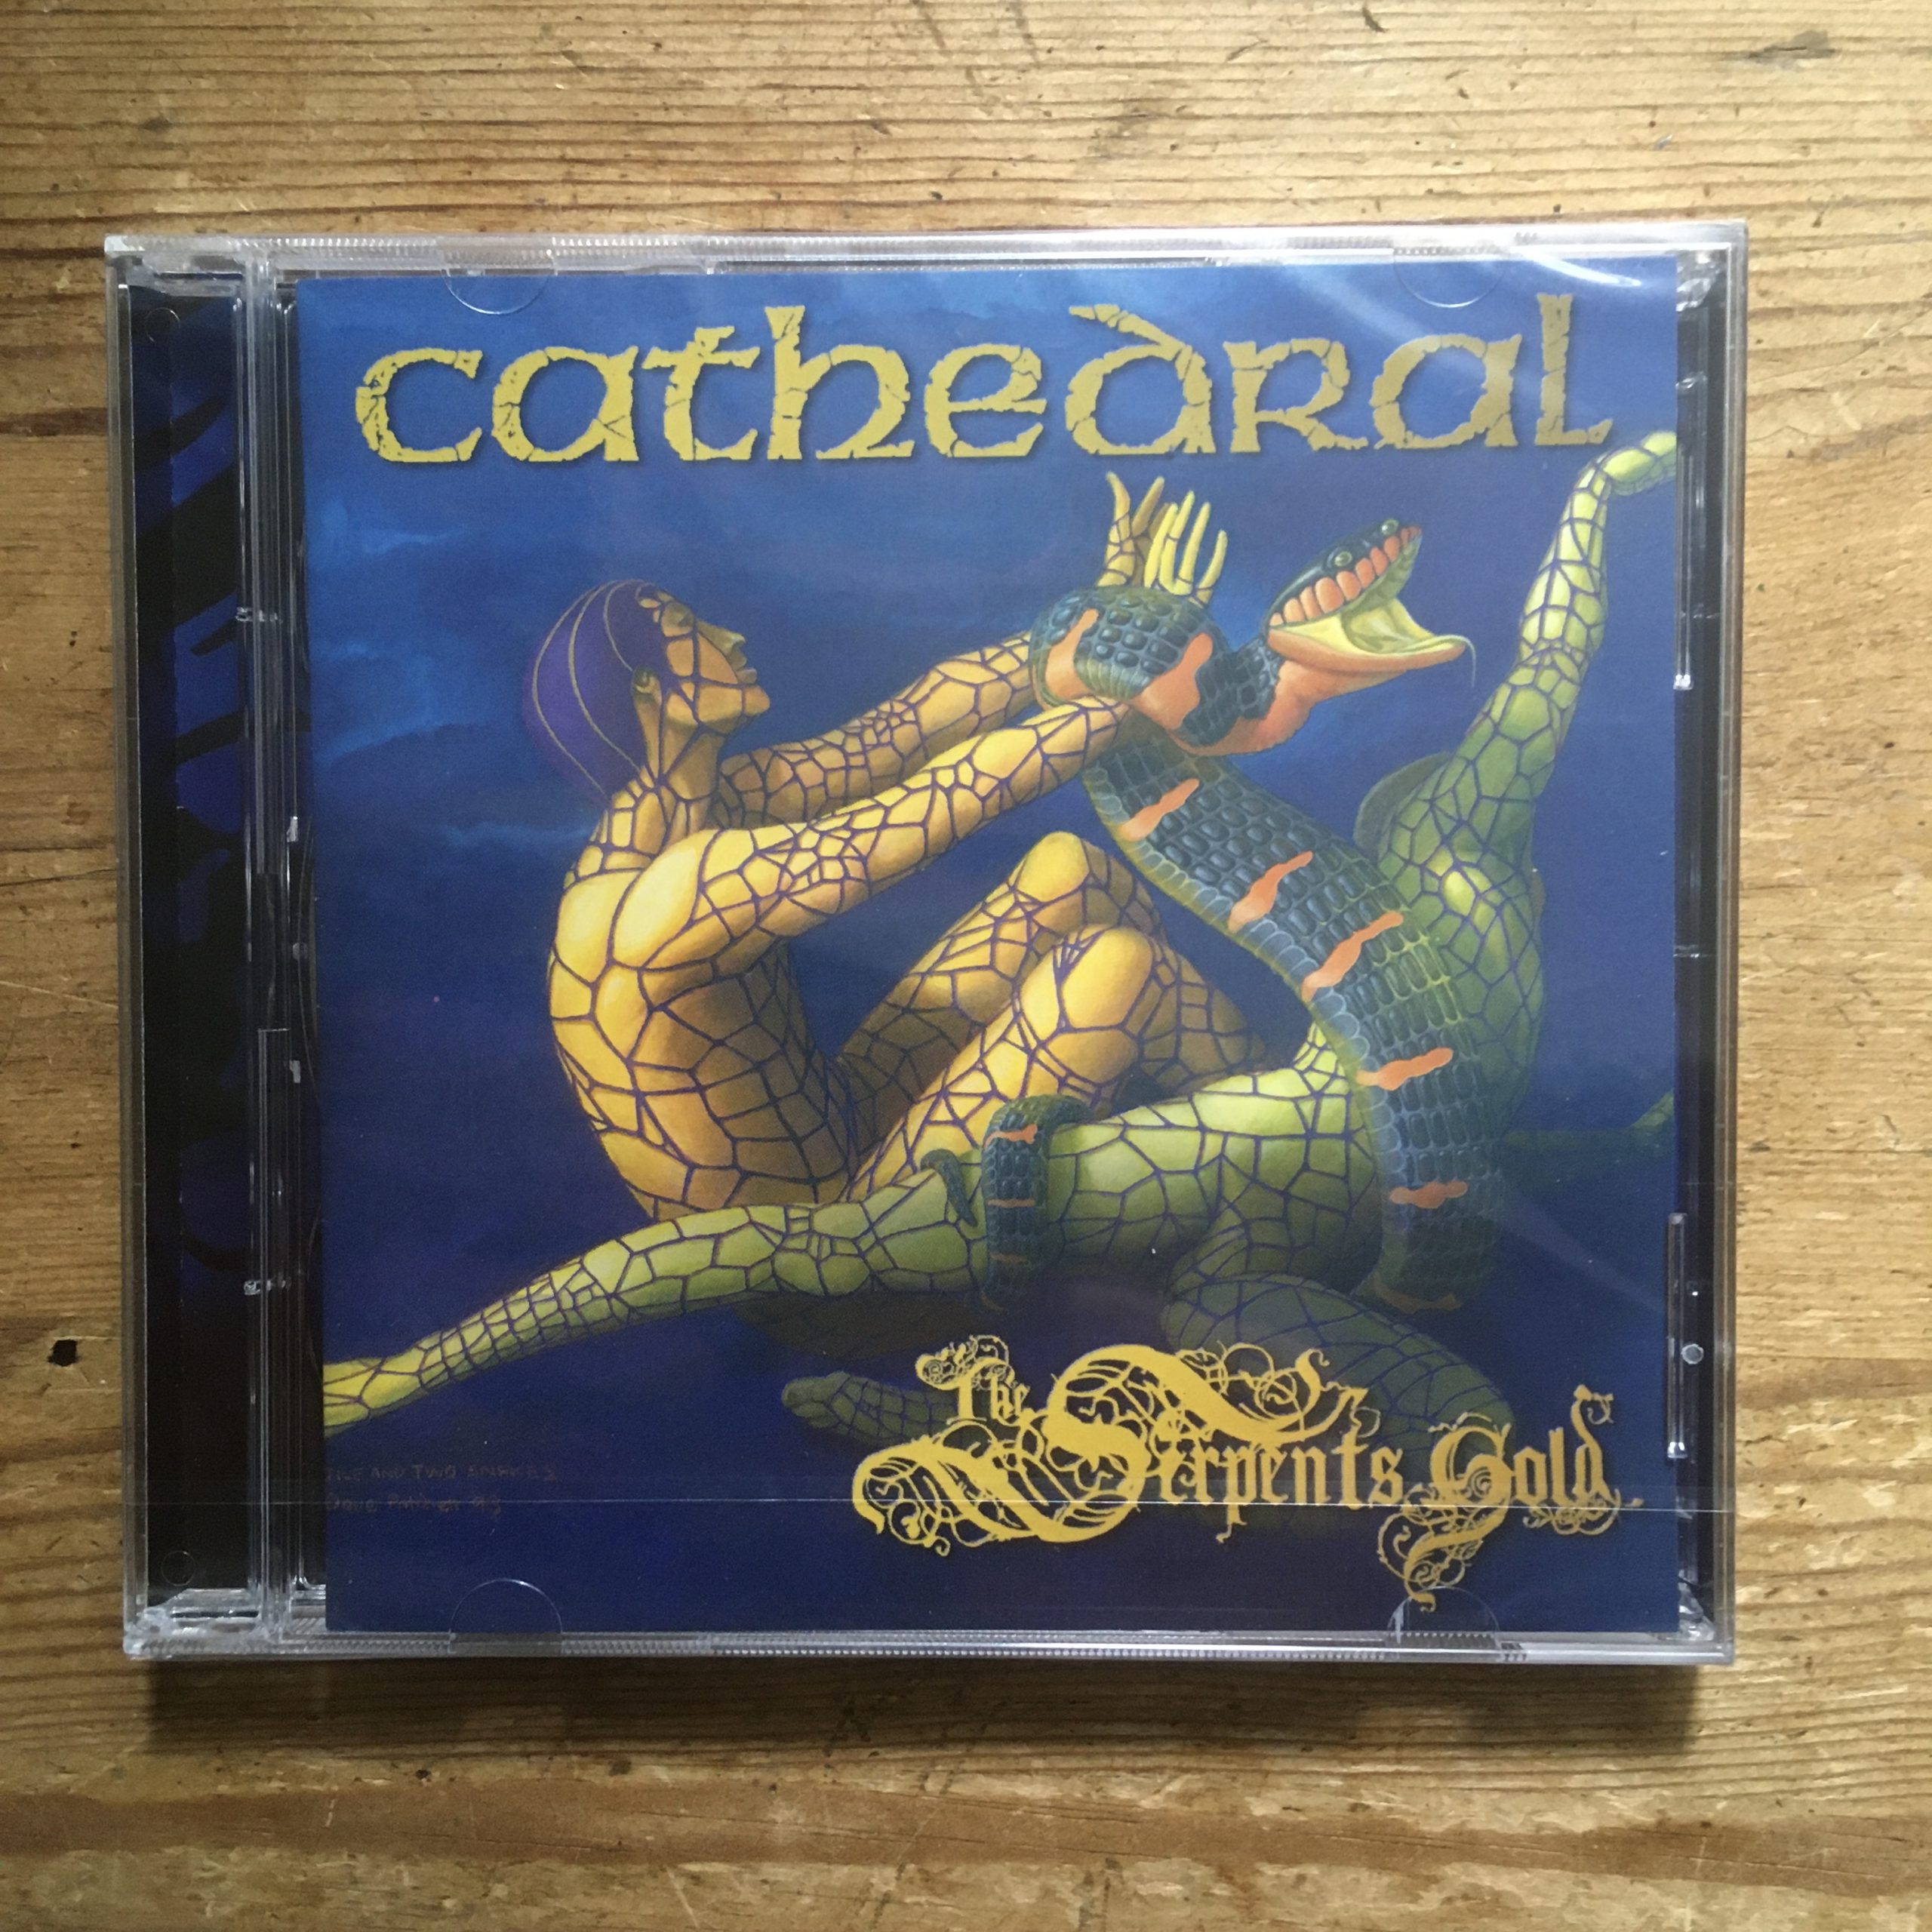 Photo of the Cathedral - "The Serpents Gold" 2CD